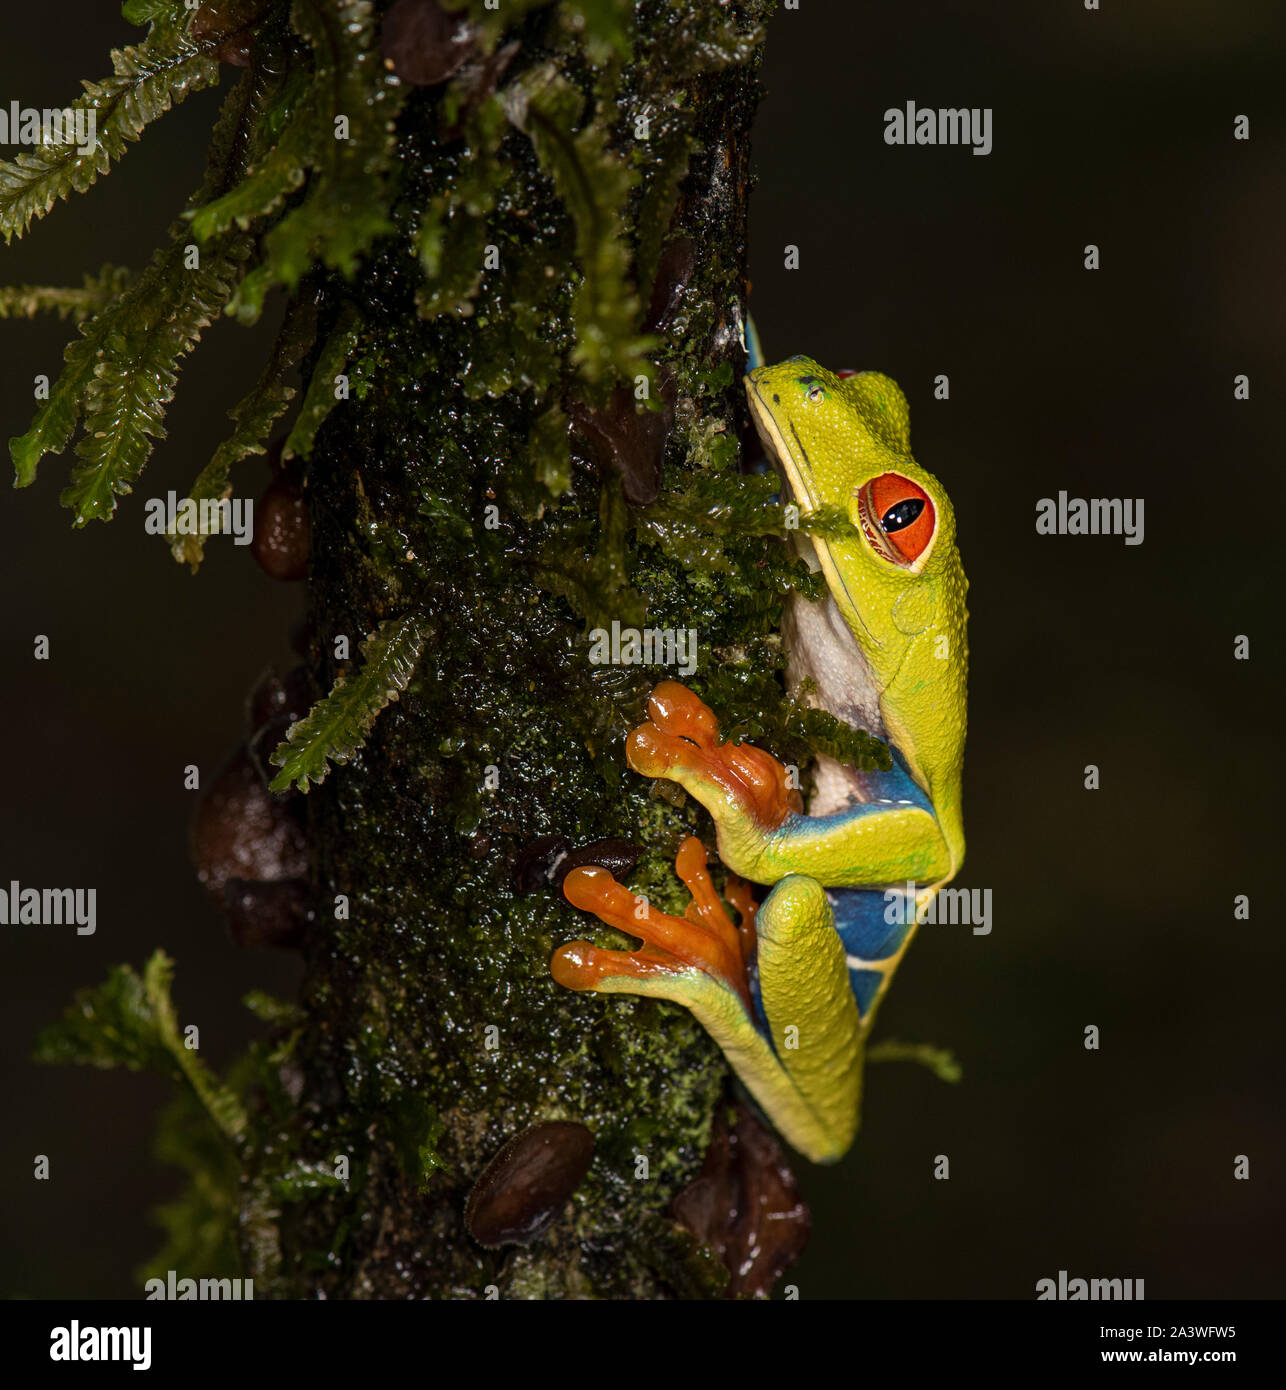 Red eyed tree frog. Costa Rica Banque D'Images